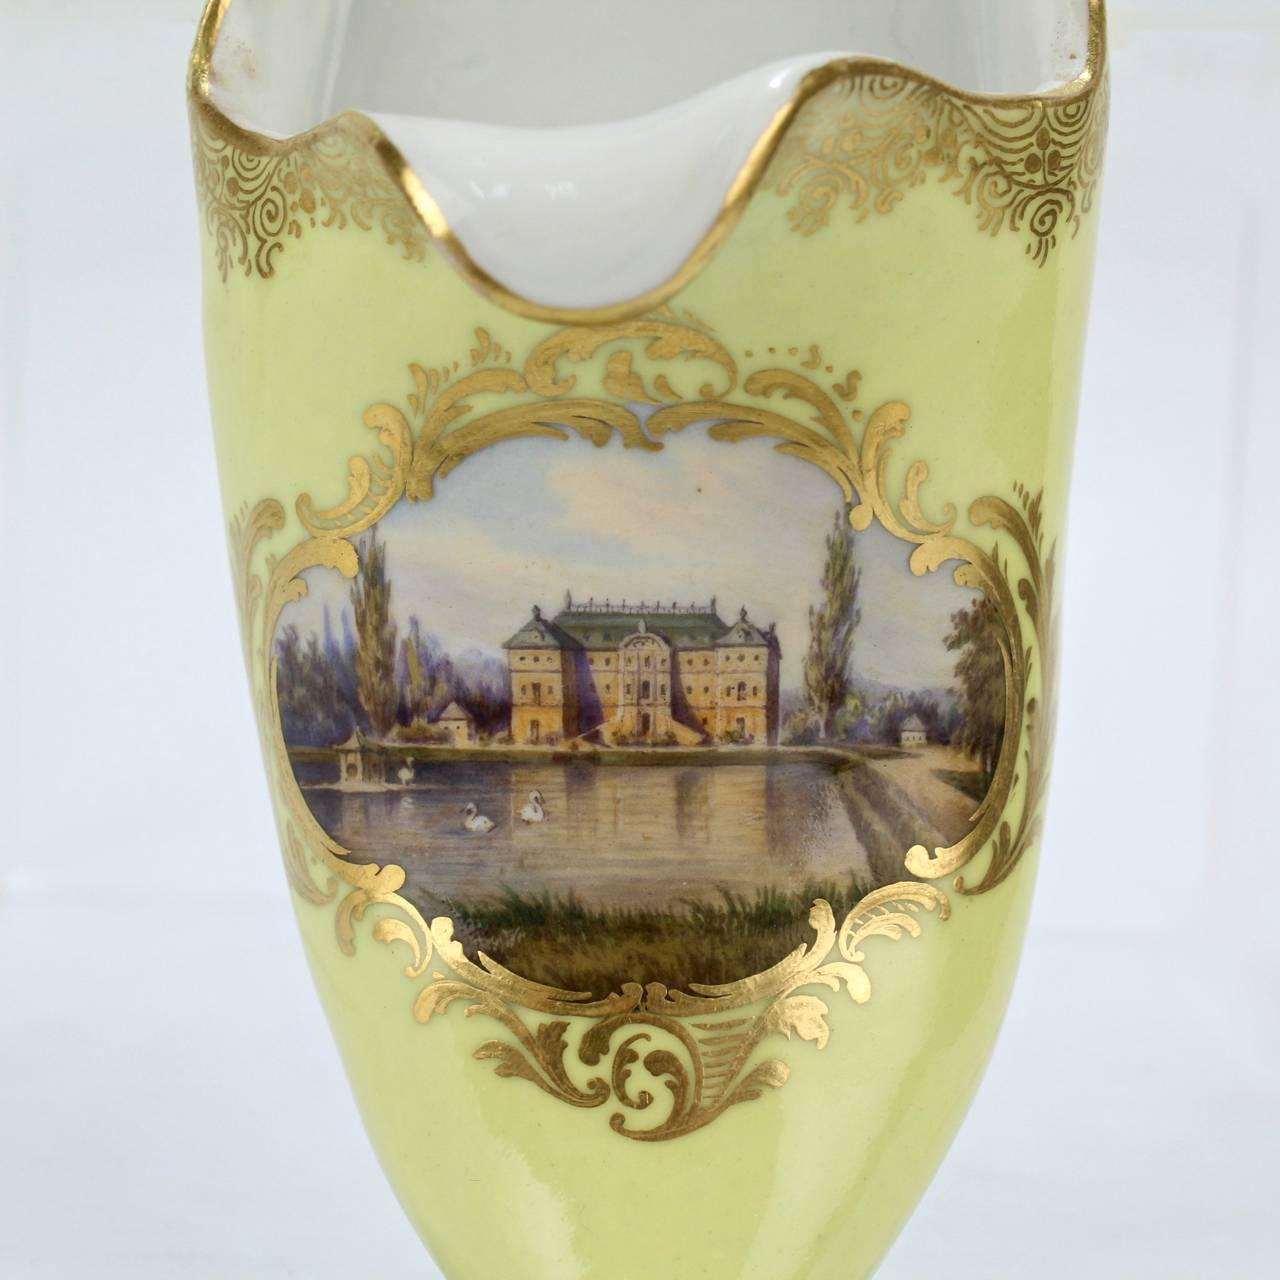 A fine and rare Meissen 'Pantoffel' or Slipper paperweight with a topographical scene.

The hand-painted cartouche depicts the Royal Palace and Great Gardens at Dresden and is surrounded by rich gilding and a yellow ground.

The base bears a